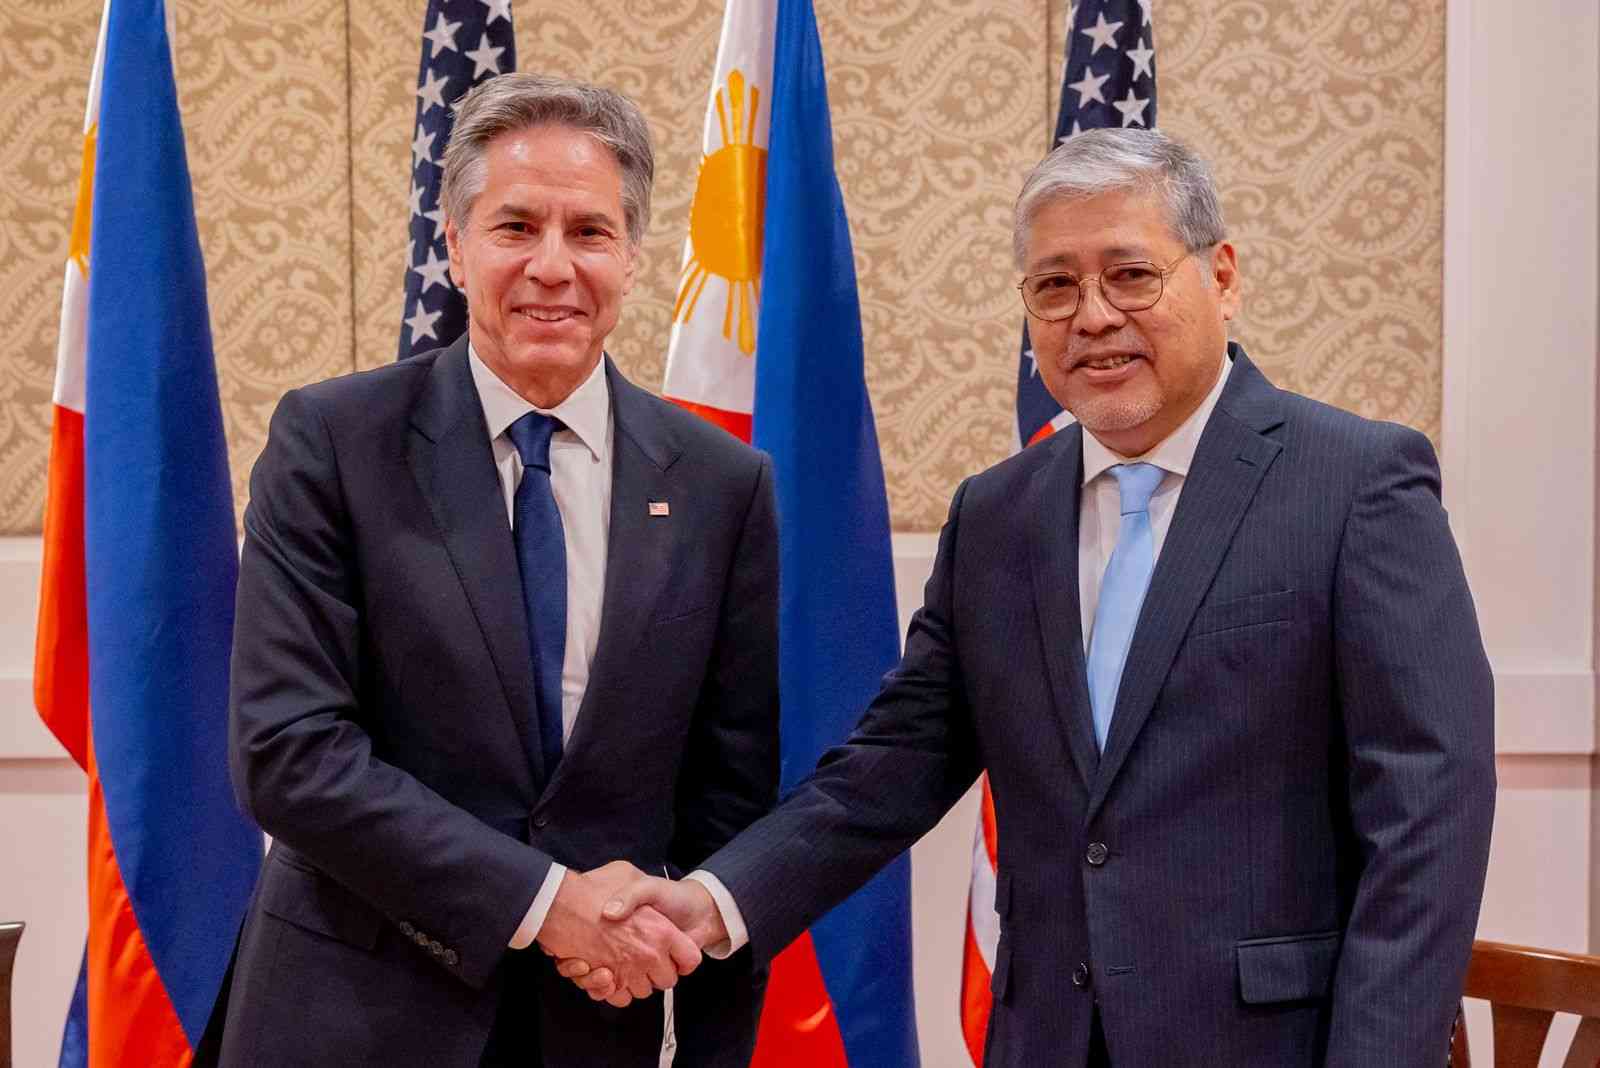 U.S. stands by “ironclad” commitments to PH on economic and defense cooperation – Blinken